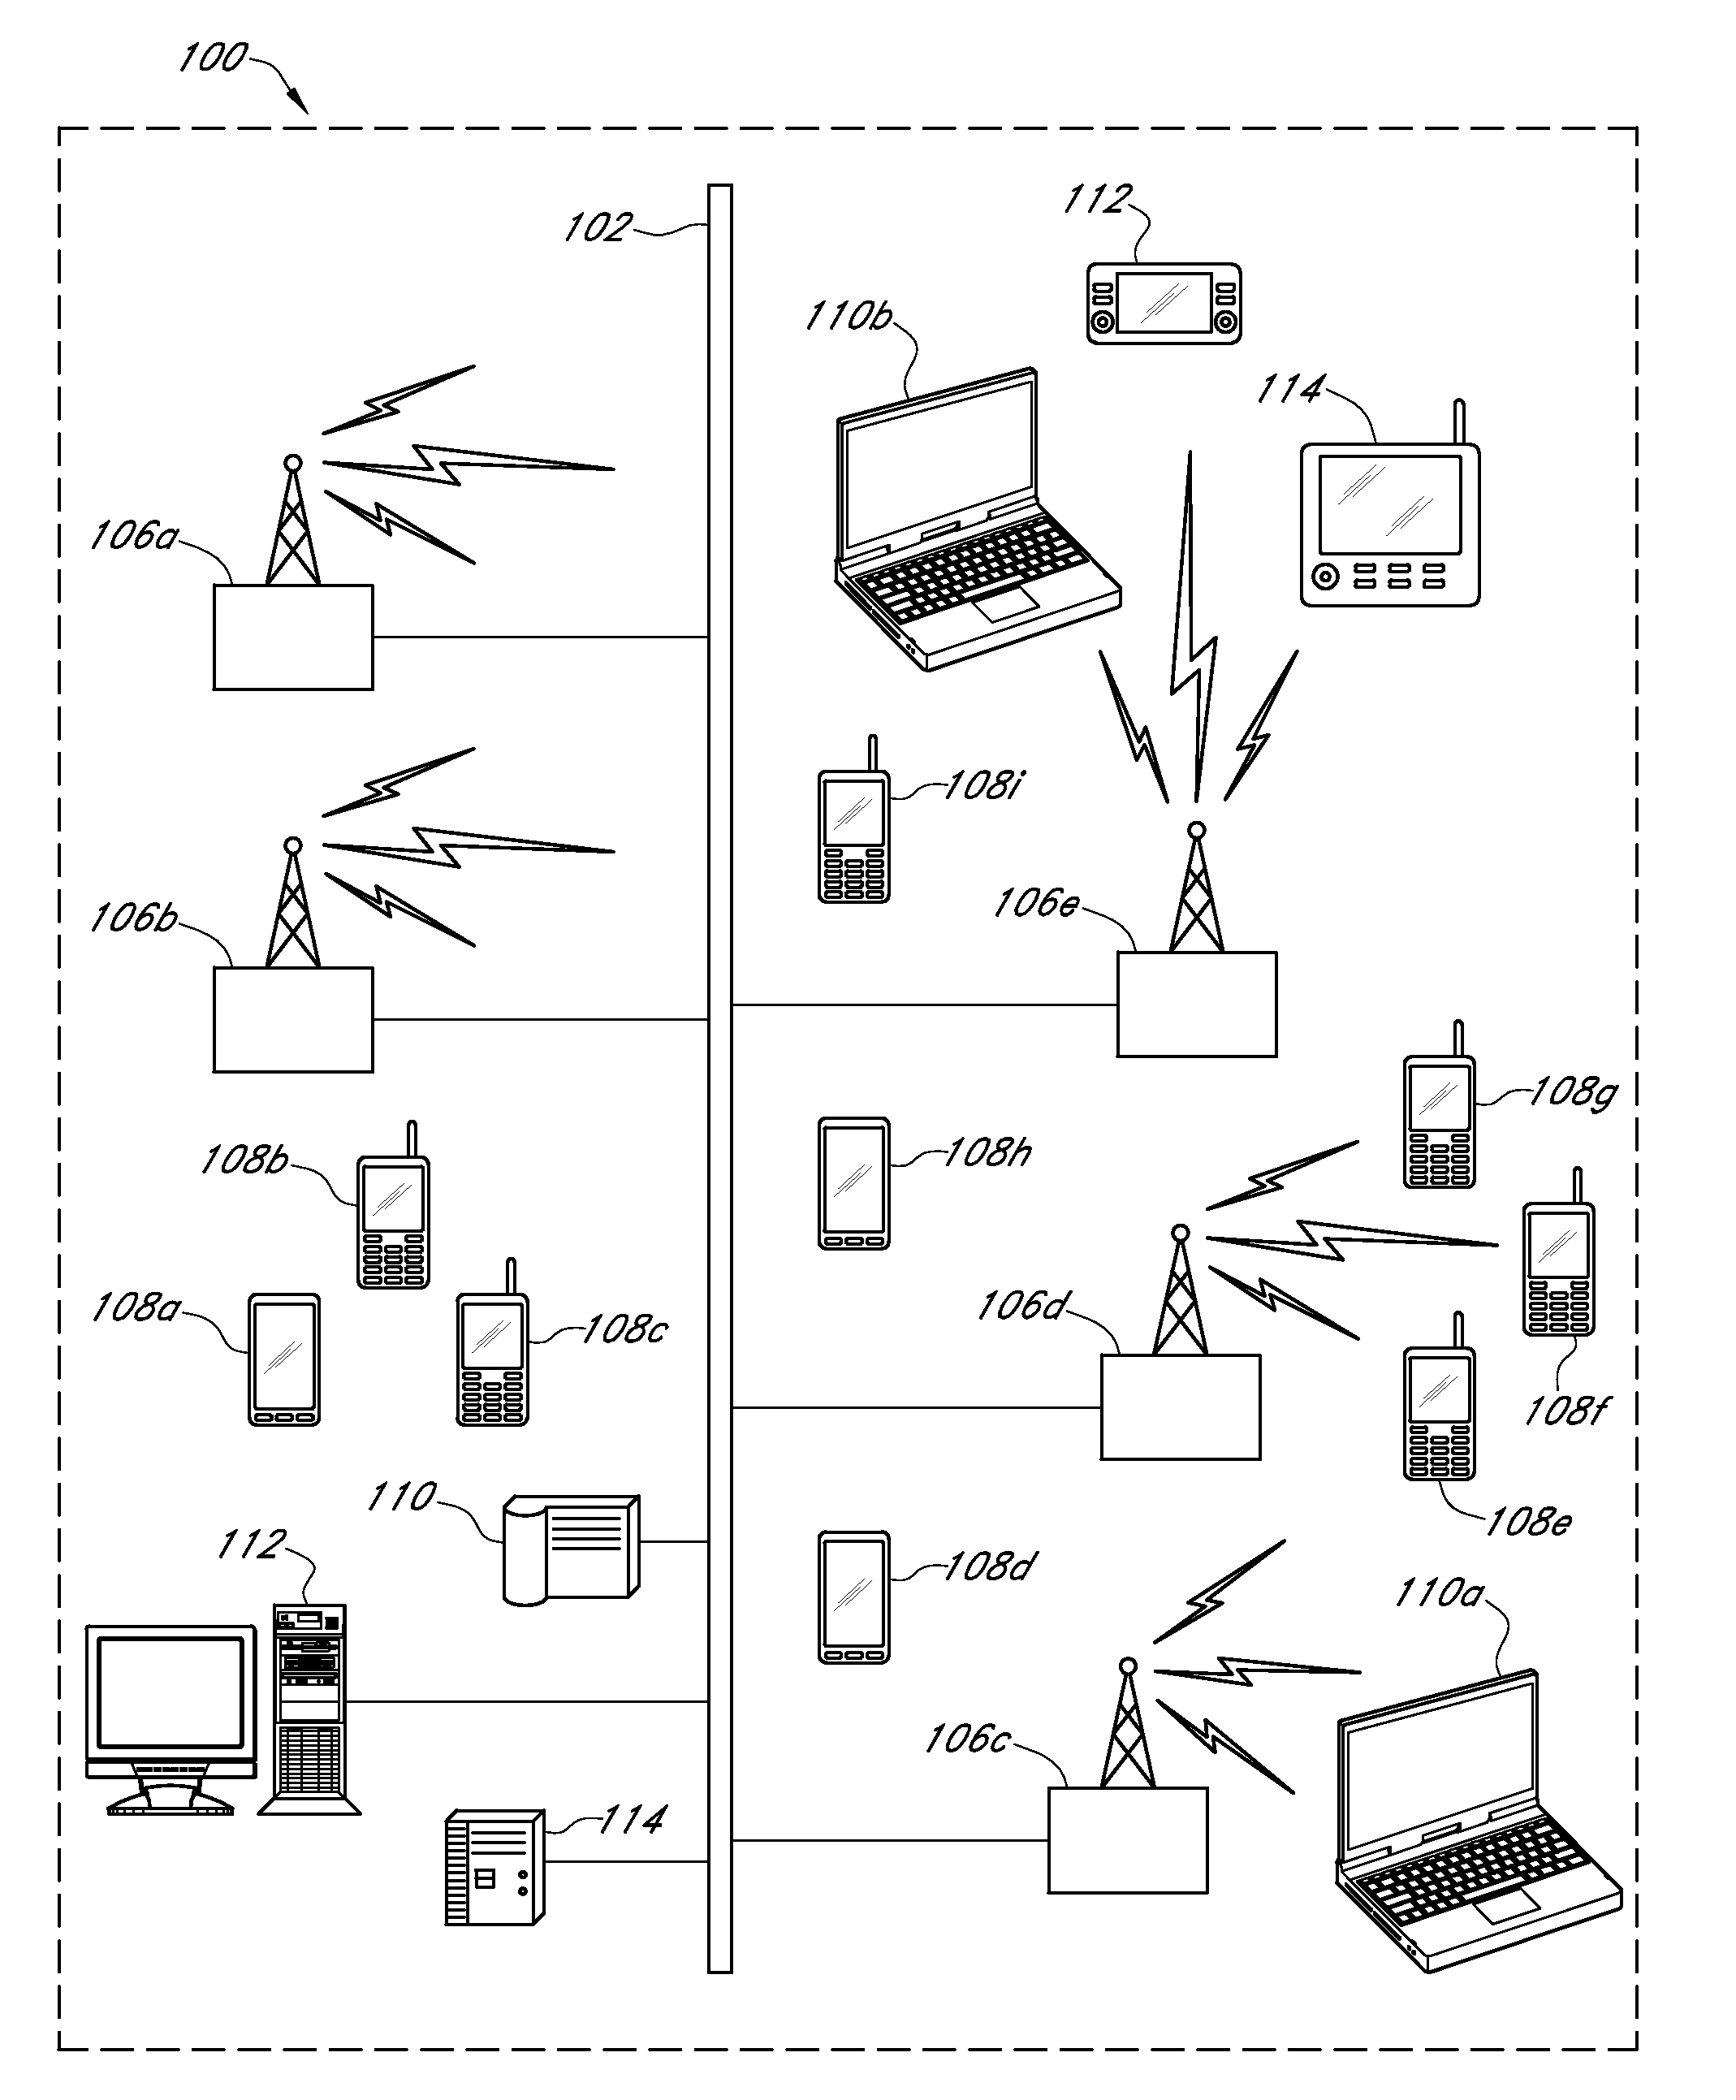 Systems and methods for autonomously determining network capacity and load balancing amongst multiple network cells